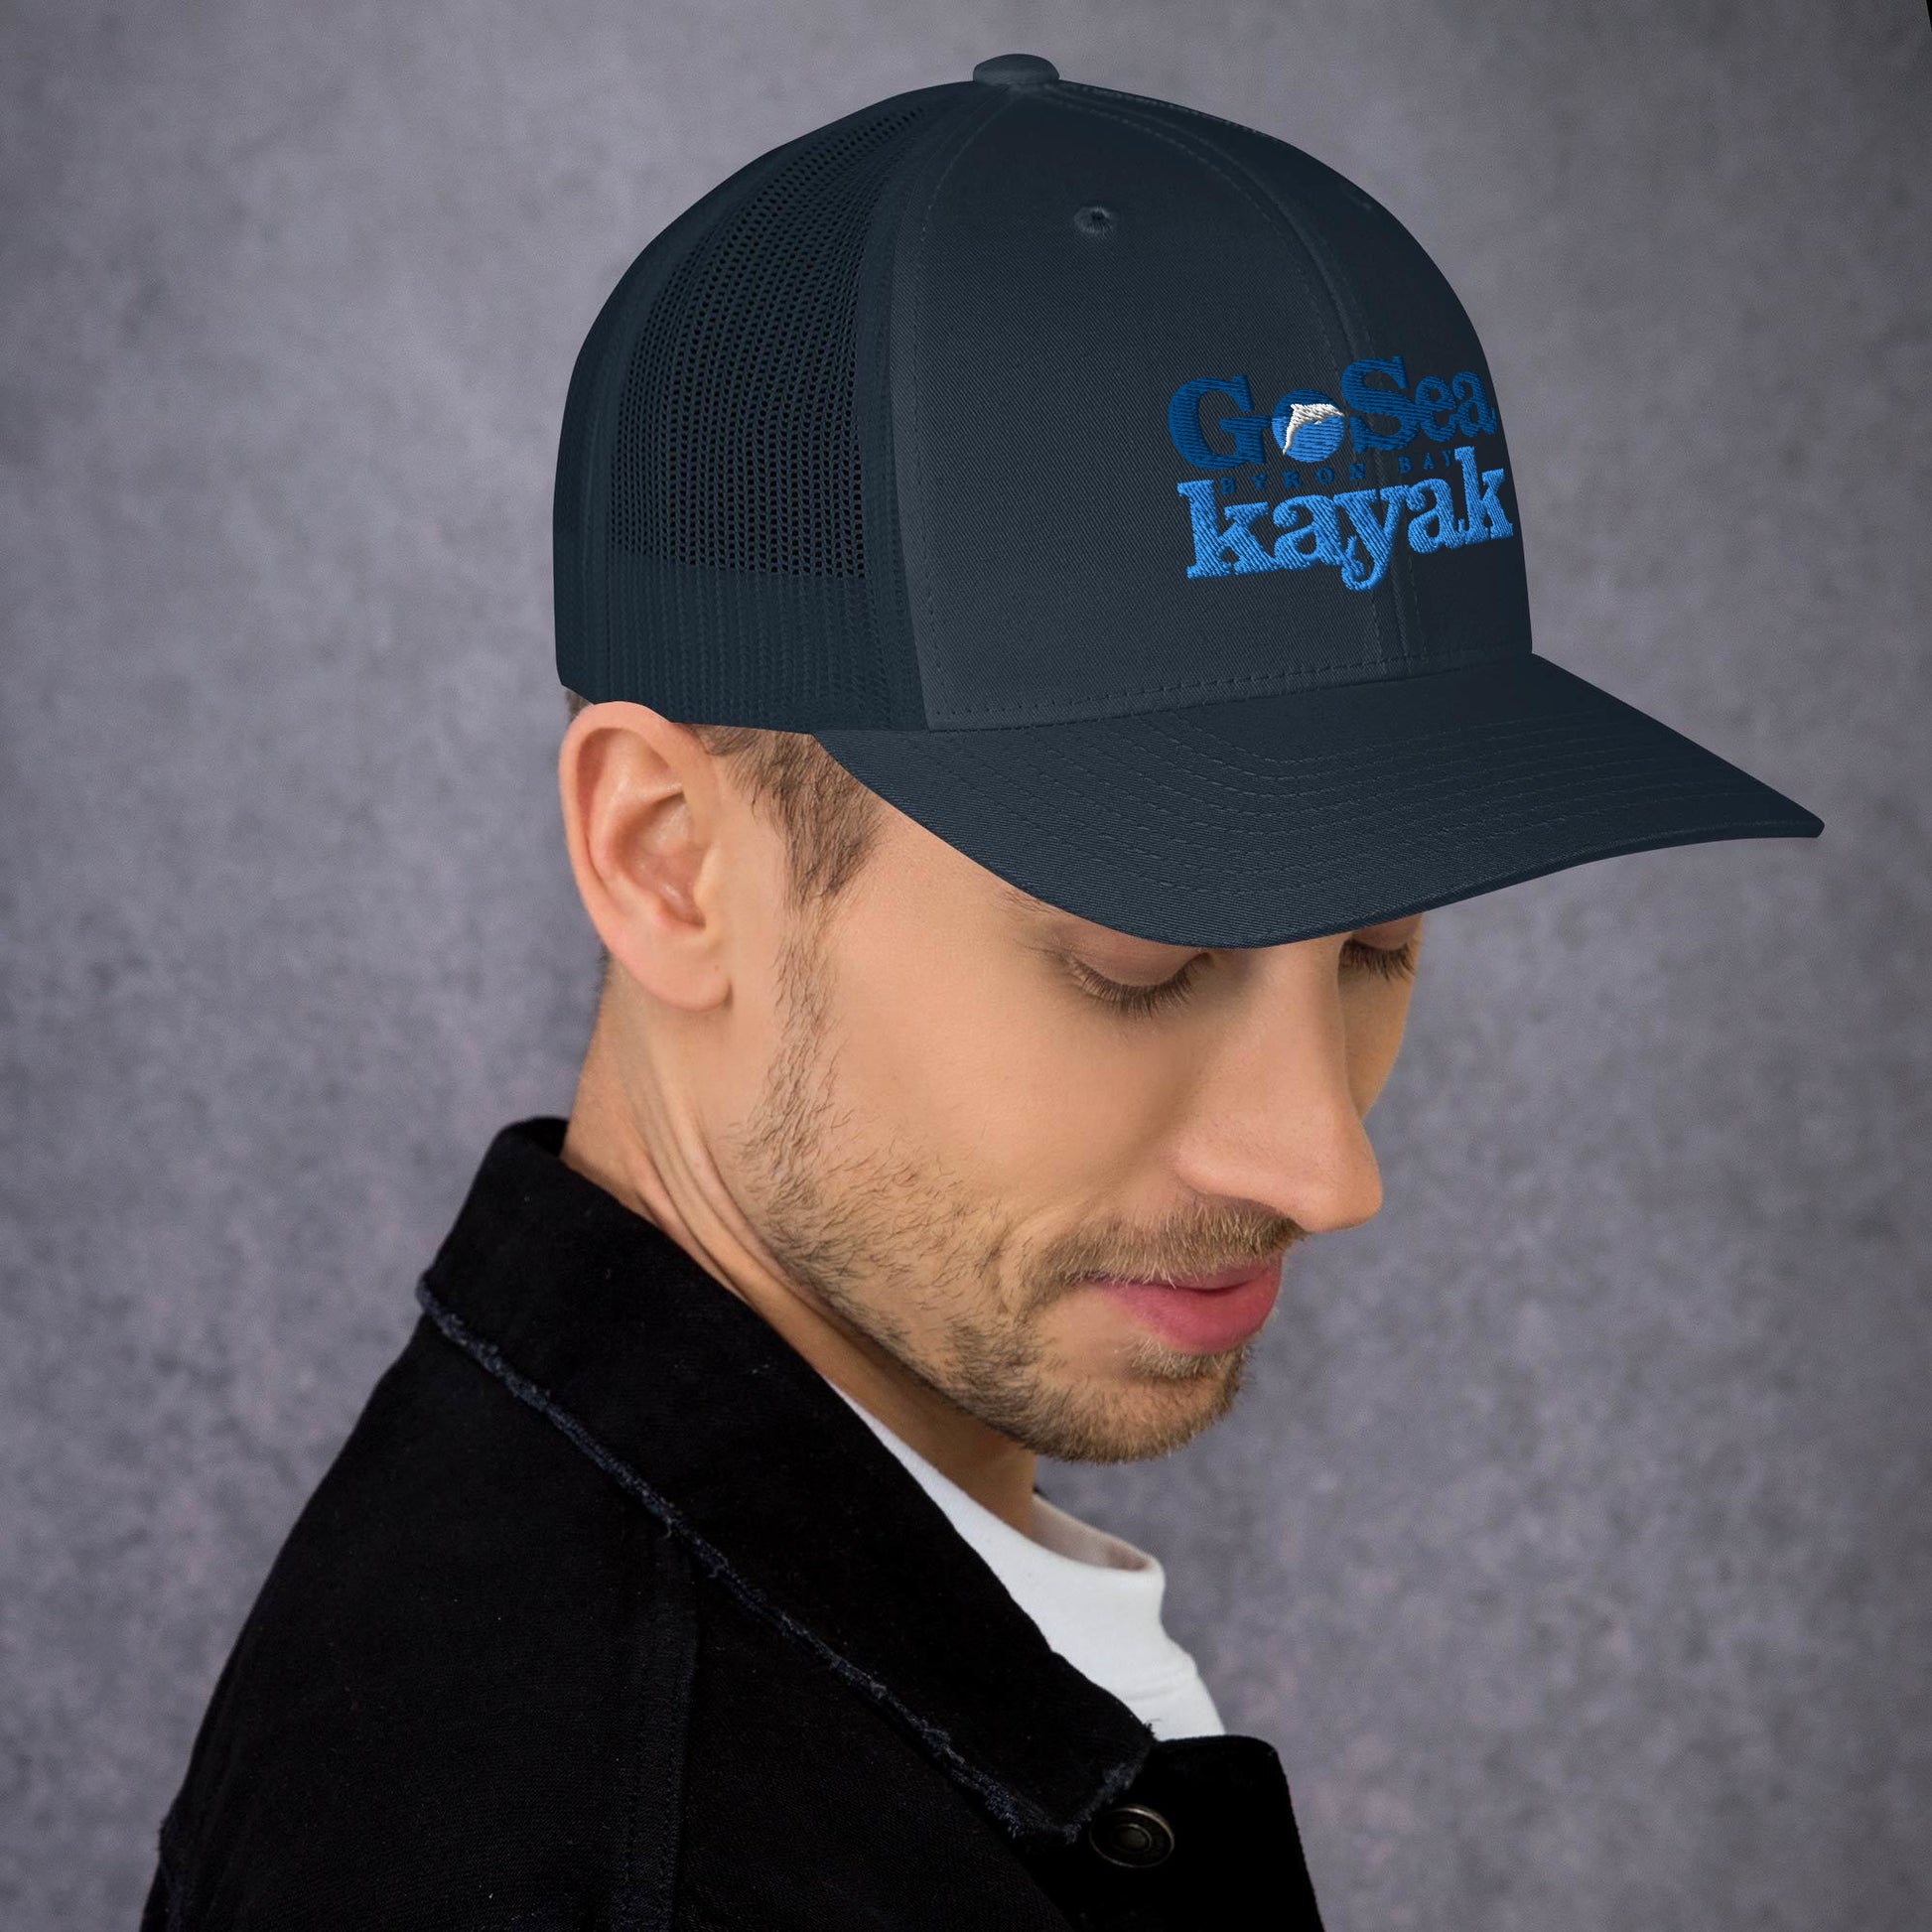  Trucker Cap - Navy - side view - being warn by man with his head down - Go Sea Kayak Byron Bay logo on front - Genuine Byron Bay Merchandise | Produced by Go Sea Kayak Byron Bay 